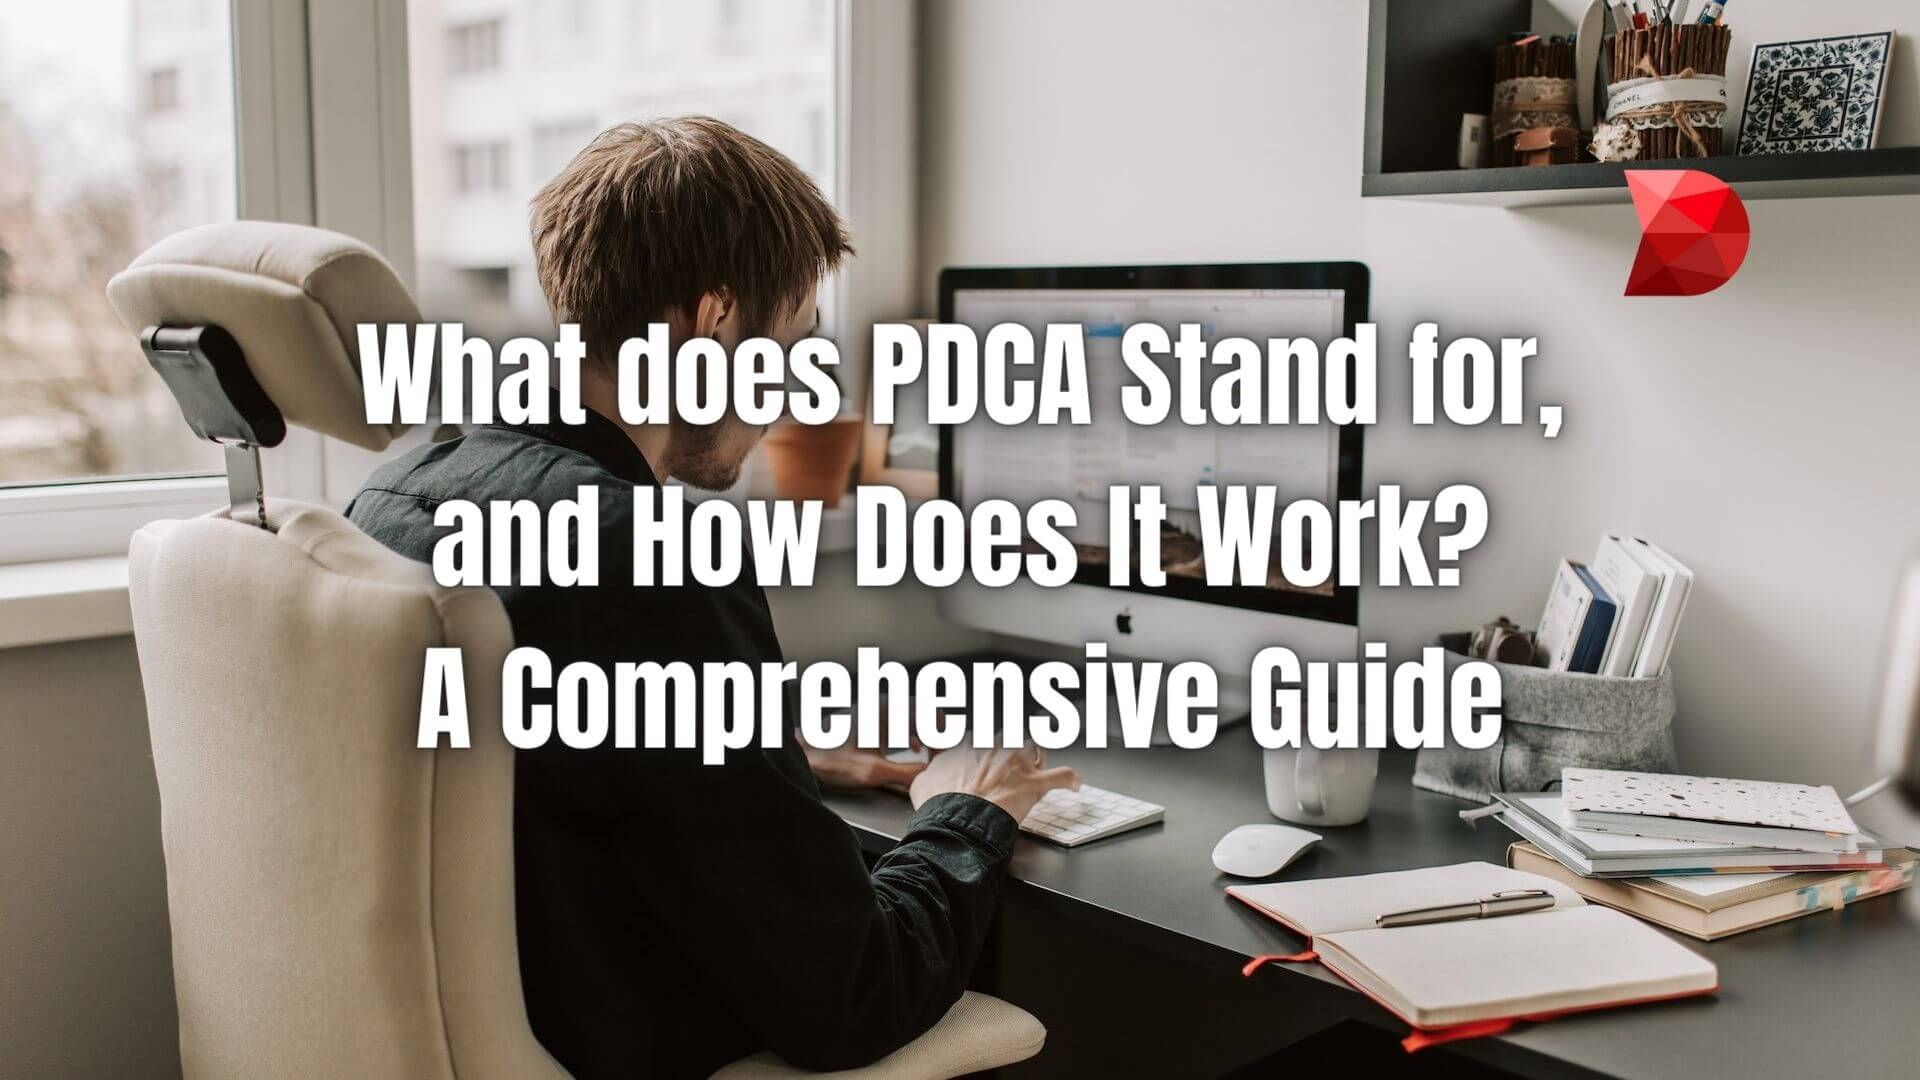 What does PDCA stand for? This project planning tool helps implement new procedures, solve problems, and work systematically. Read more here!